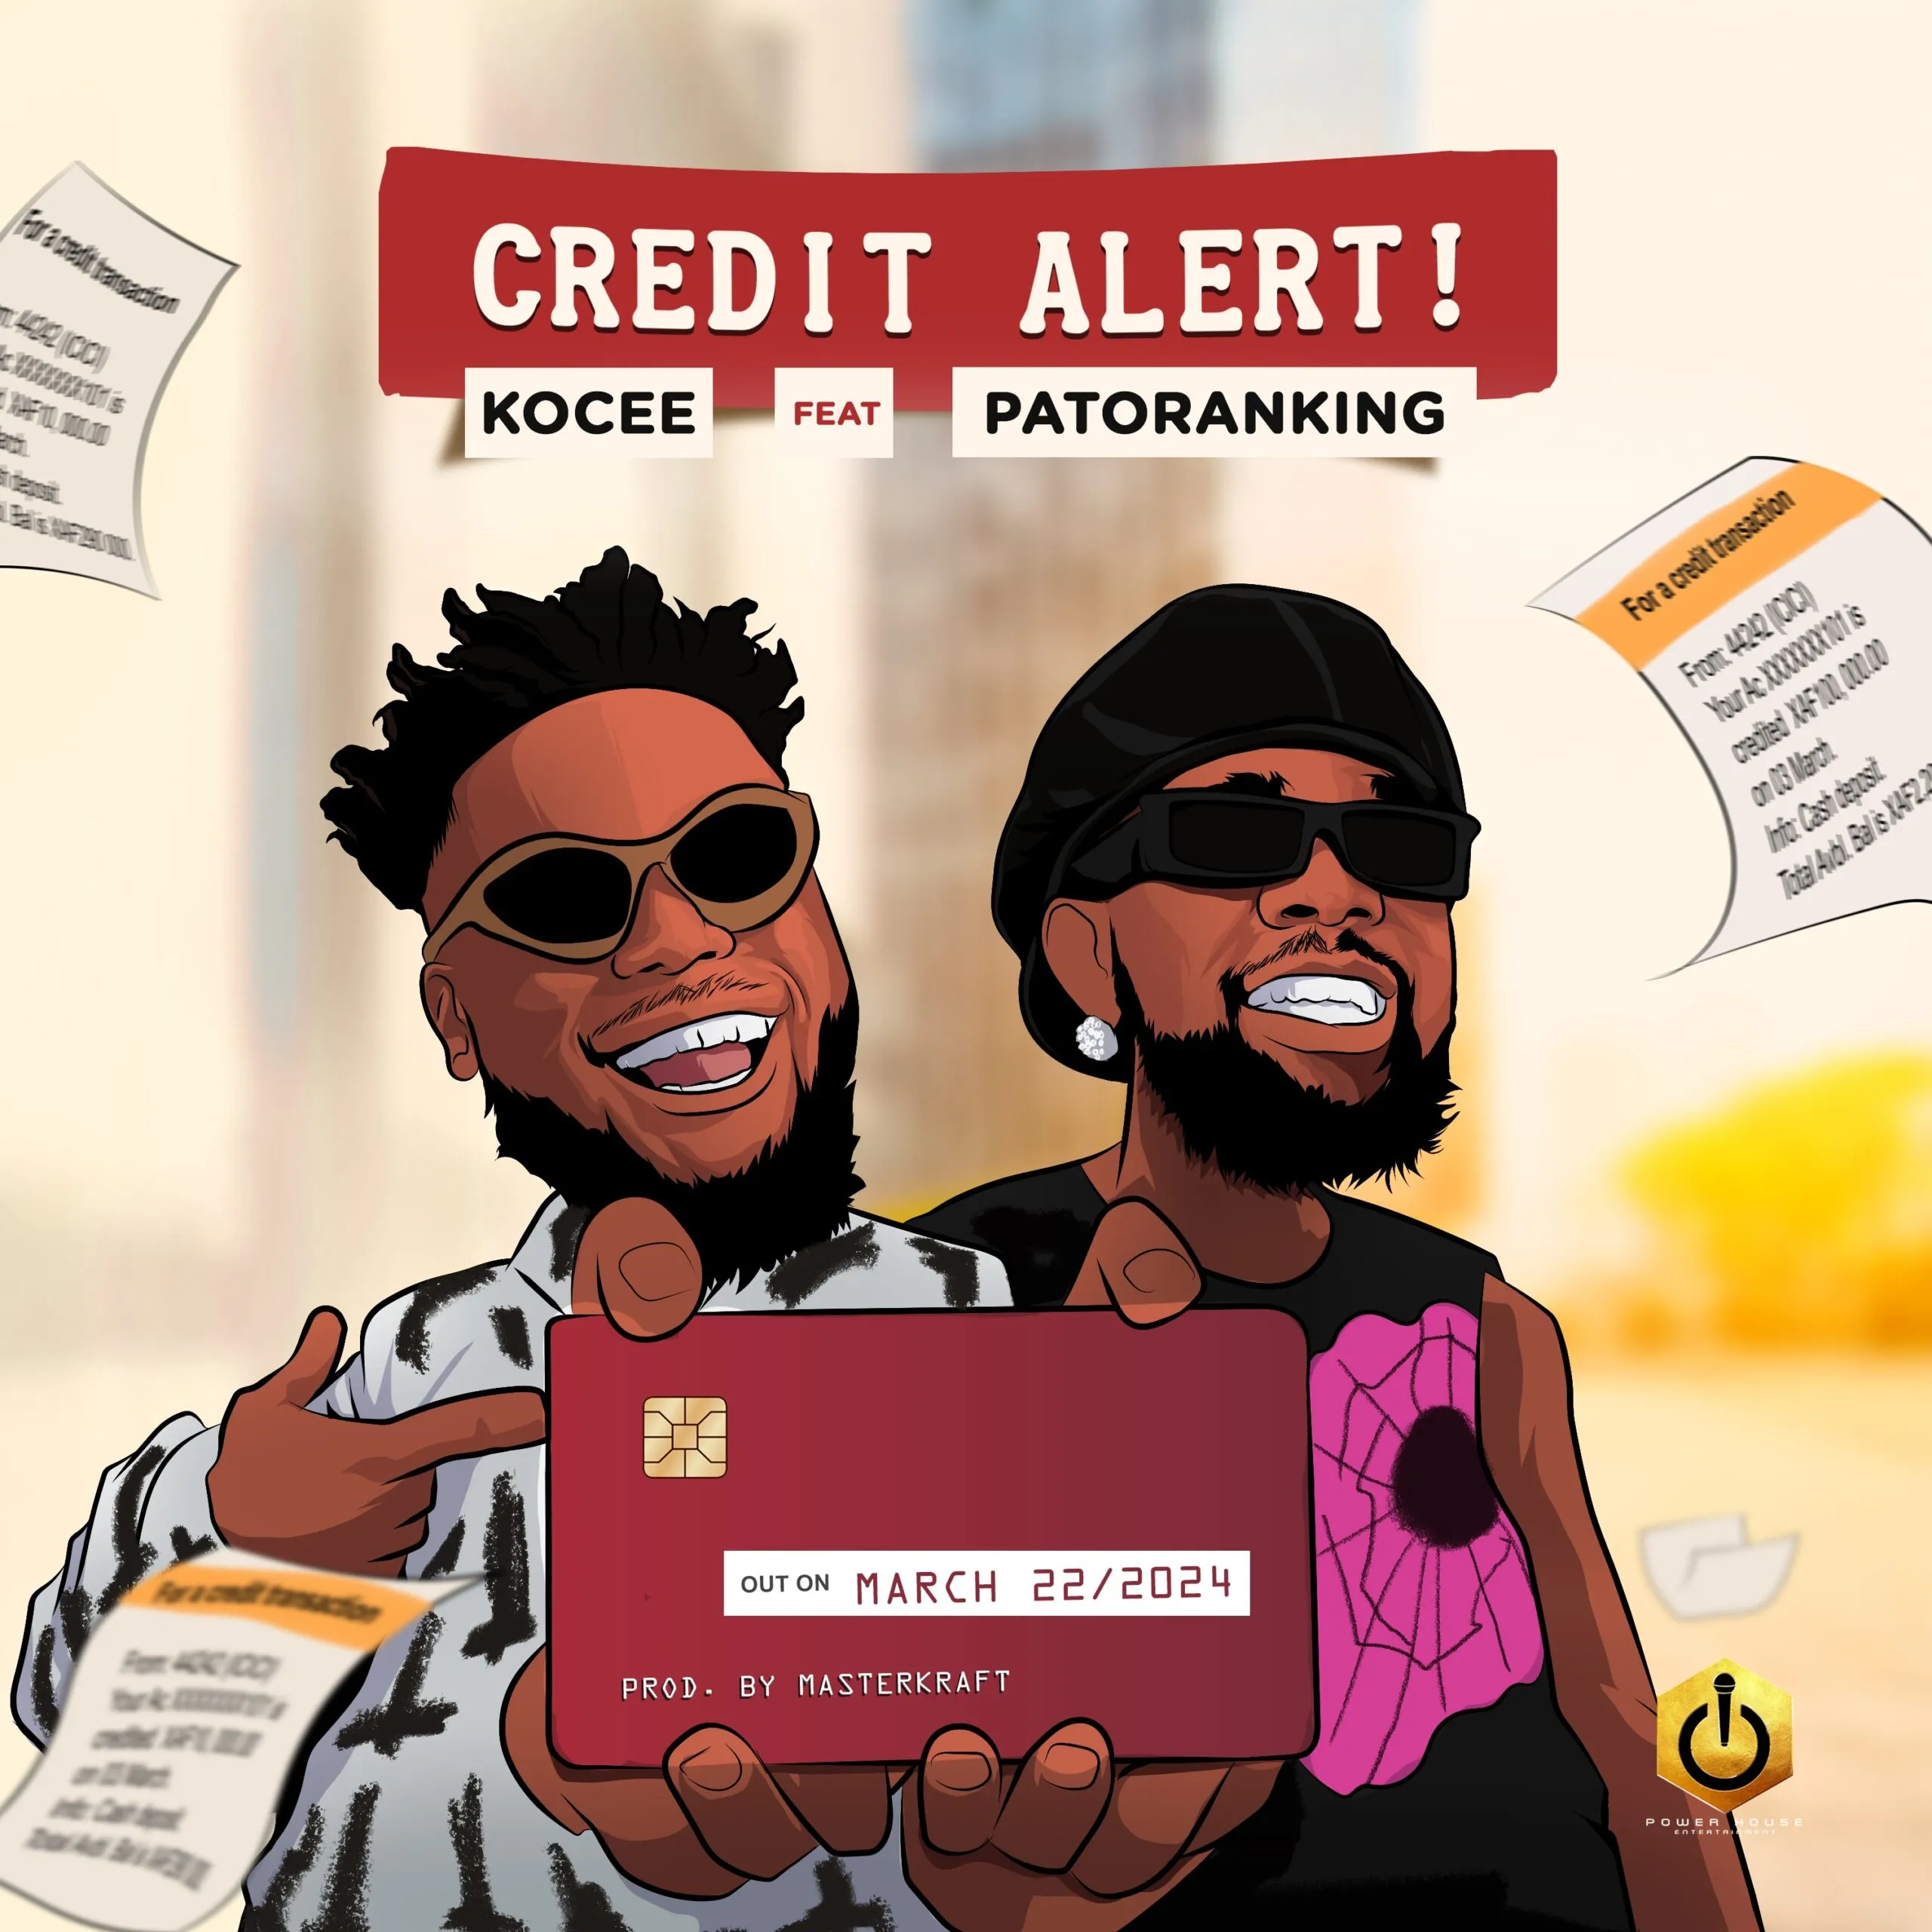 [ Video ] Kocee – “No Credit” Featuring Patoranking